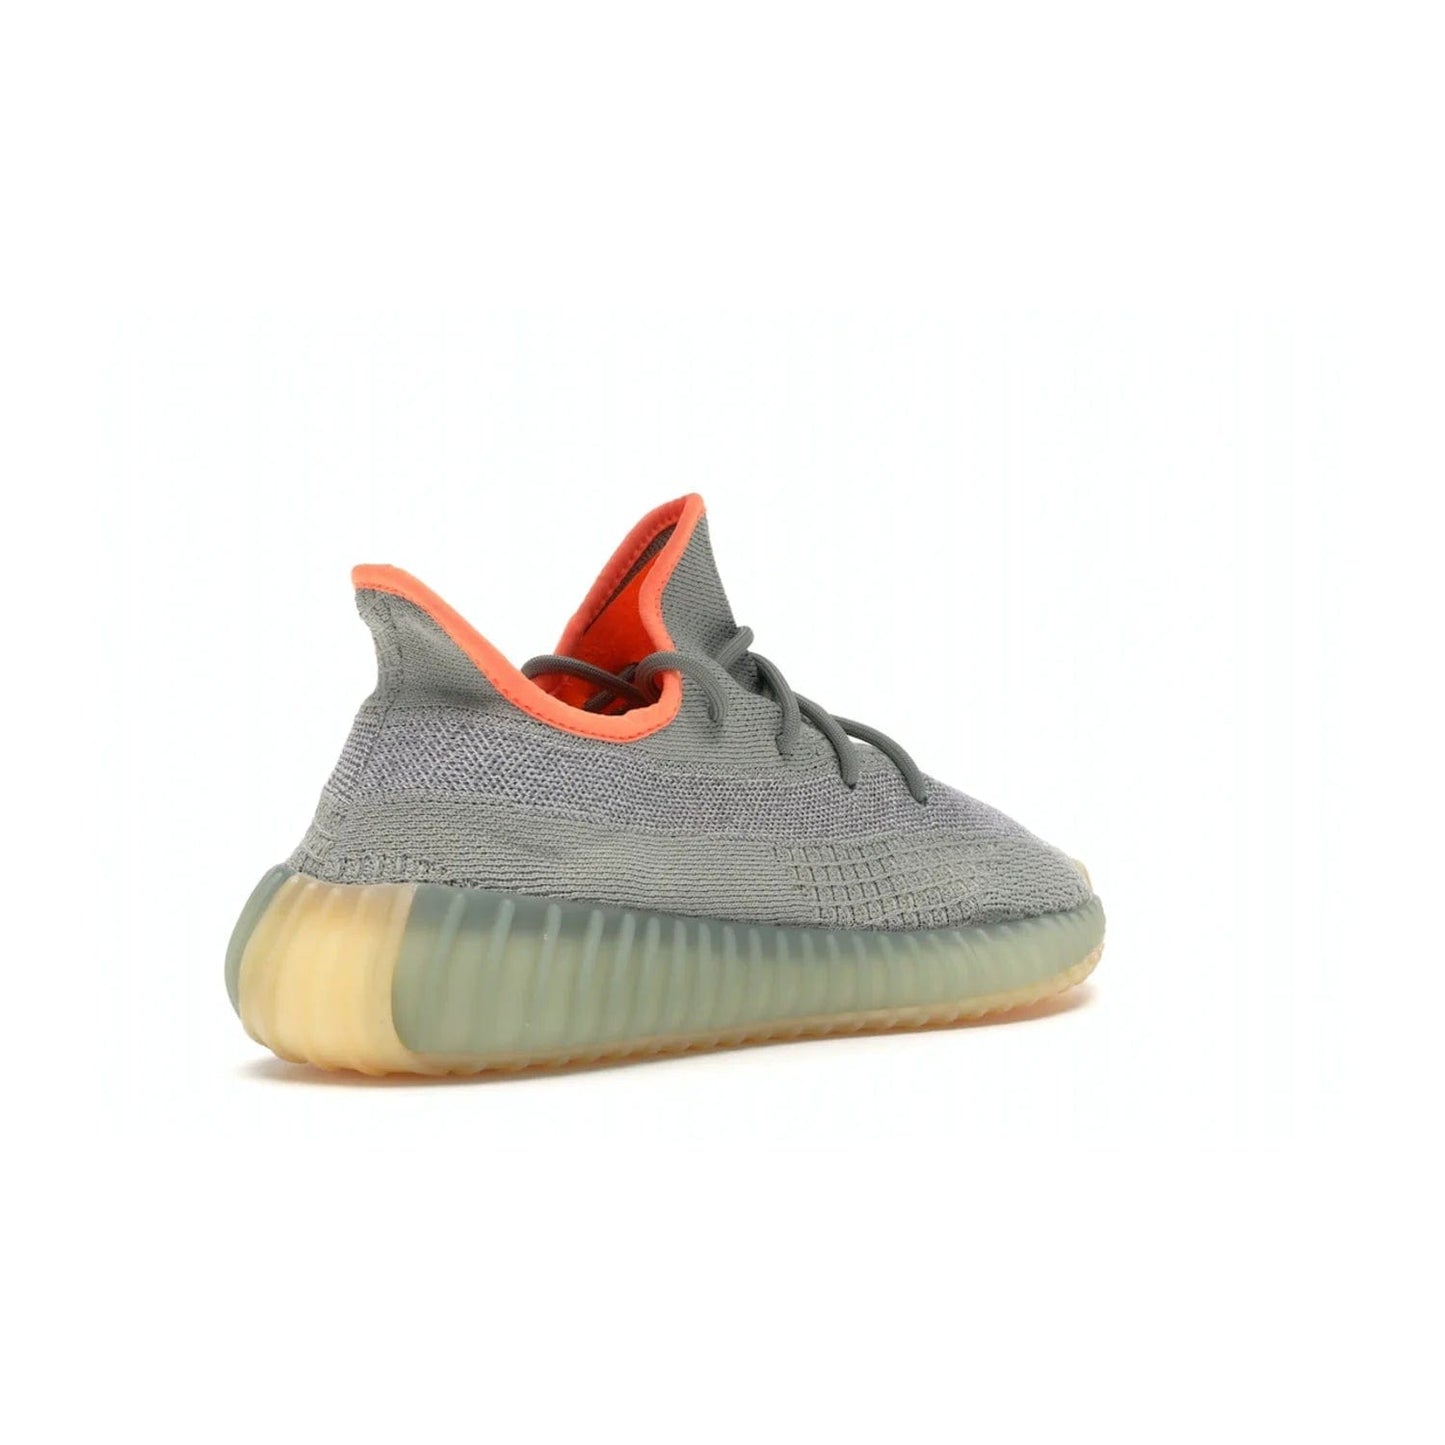 adidas Yeezy Boost 350 V2 Desert Sage - Image 32 - Only at www.BallersClubKickz.com - Upgrade your style with the adidas Yeezy Boost 350 V2 Desert Sage. This 350V2 features a Desert Sage primeknit upper with tonal side stripe, and an orange-highlighted translucent Boost cushioning sole. Stay on-trend in effortless style.